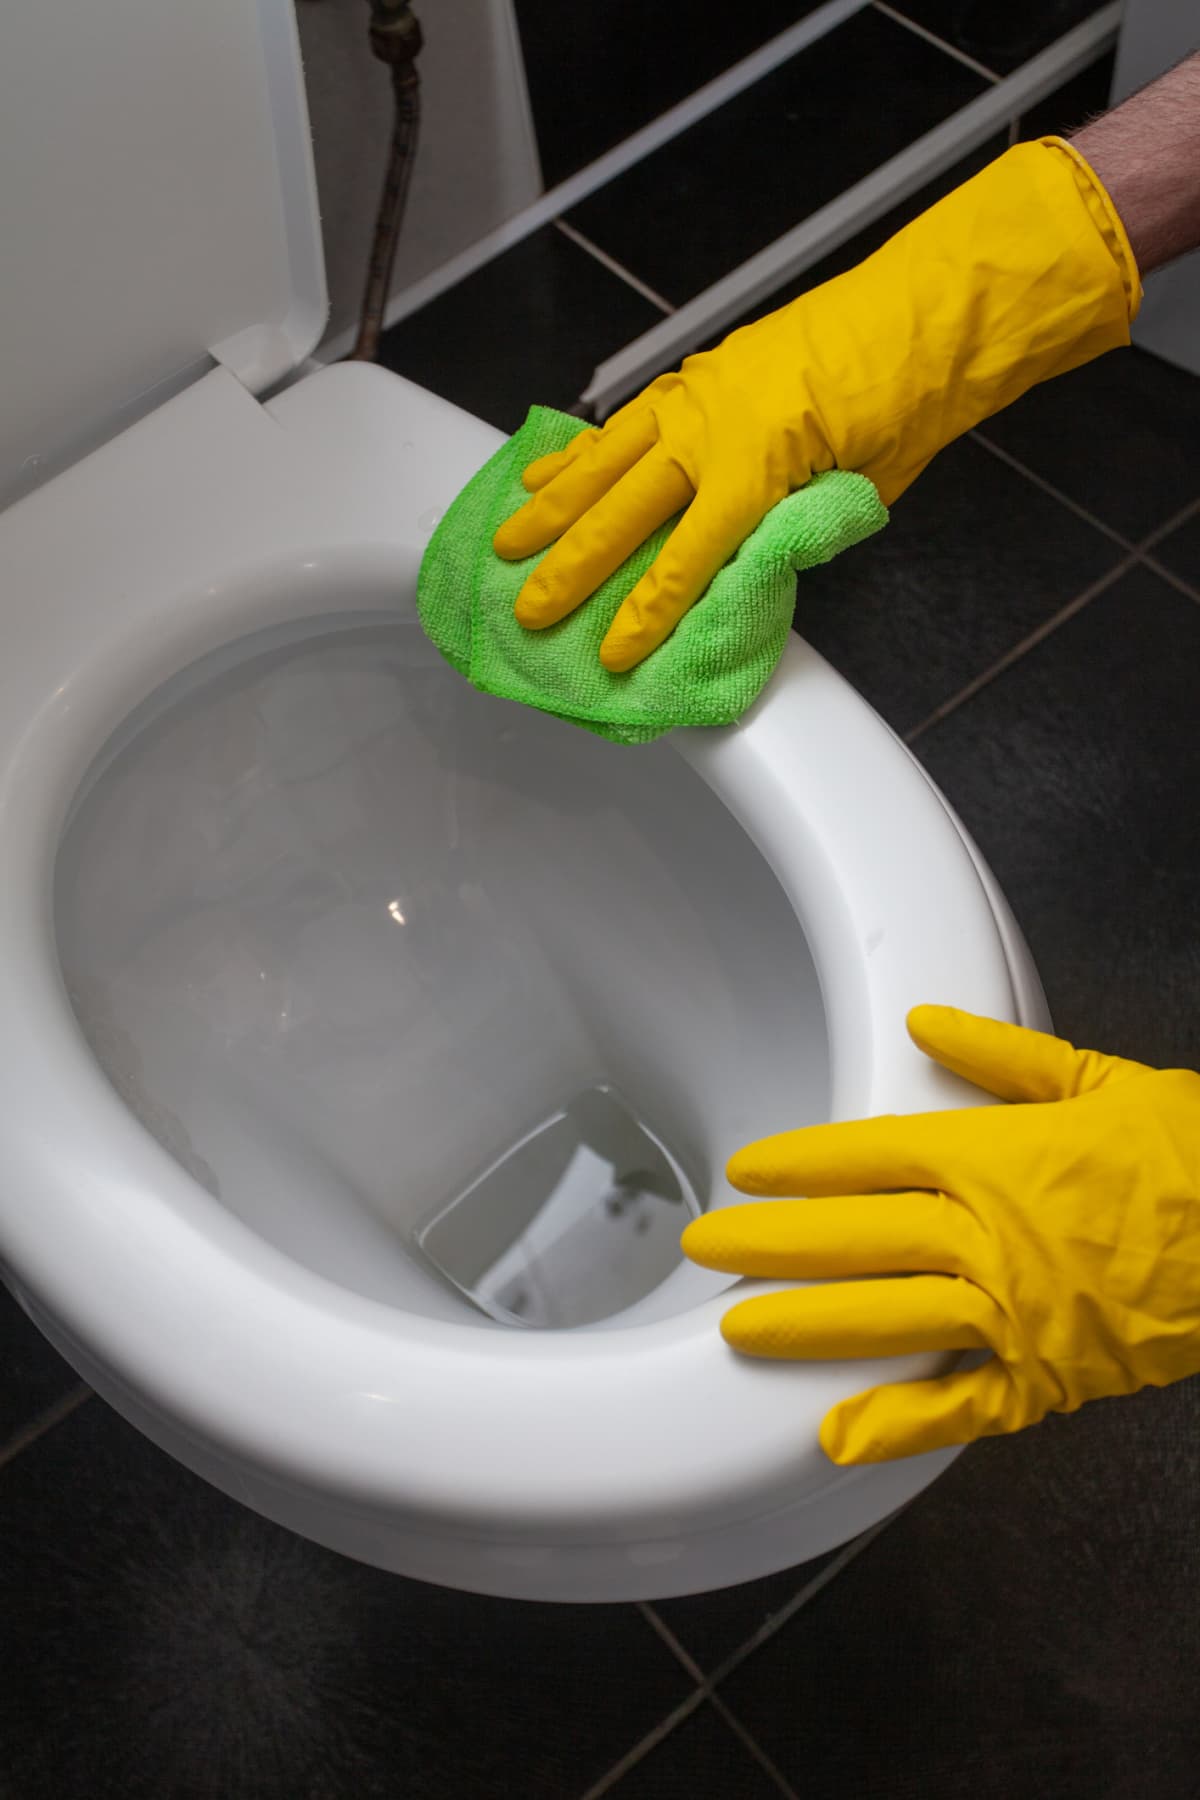 Hands of man in yellow gloves cleaning toilet bowl using cloth and detergent, concept for house cleaning and household duties